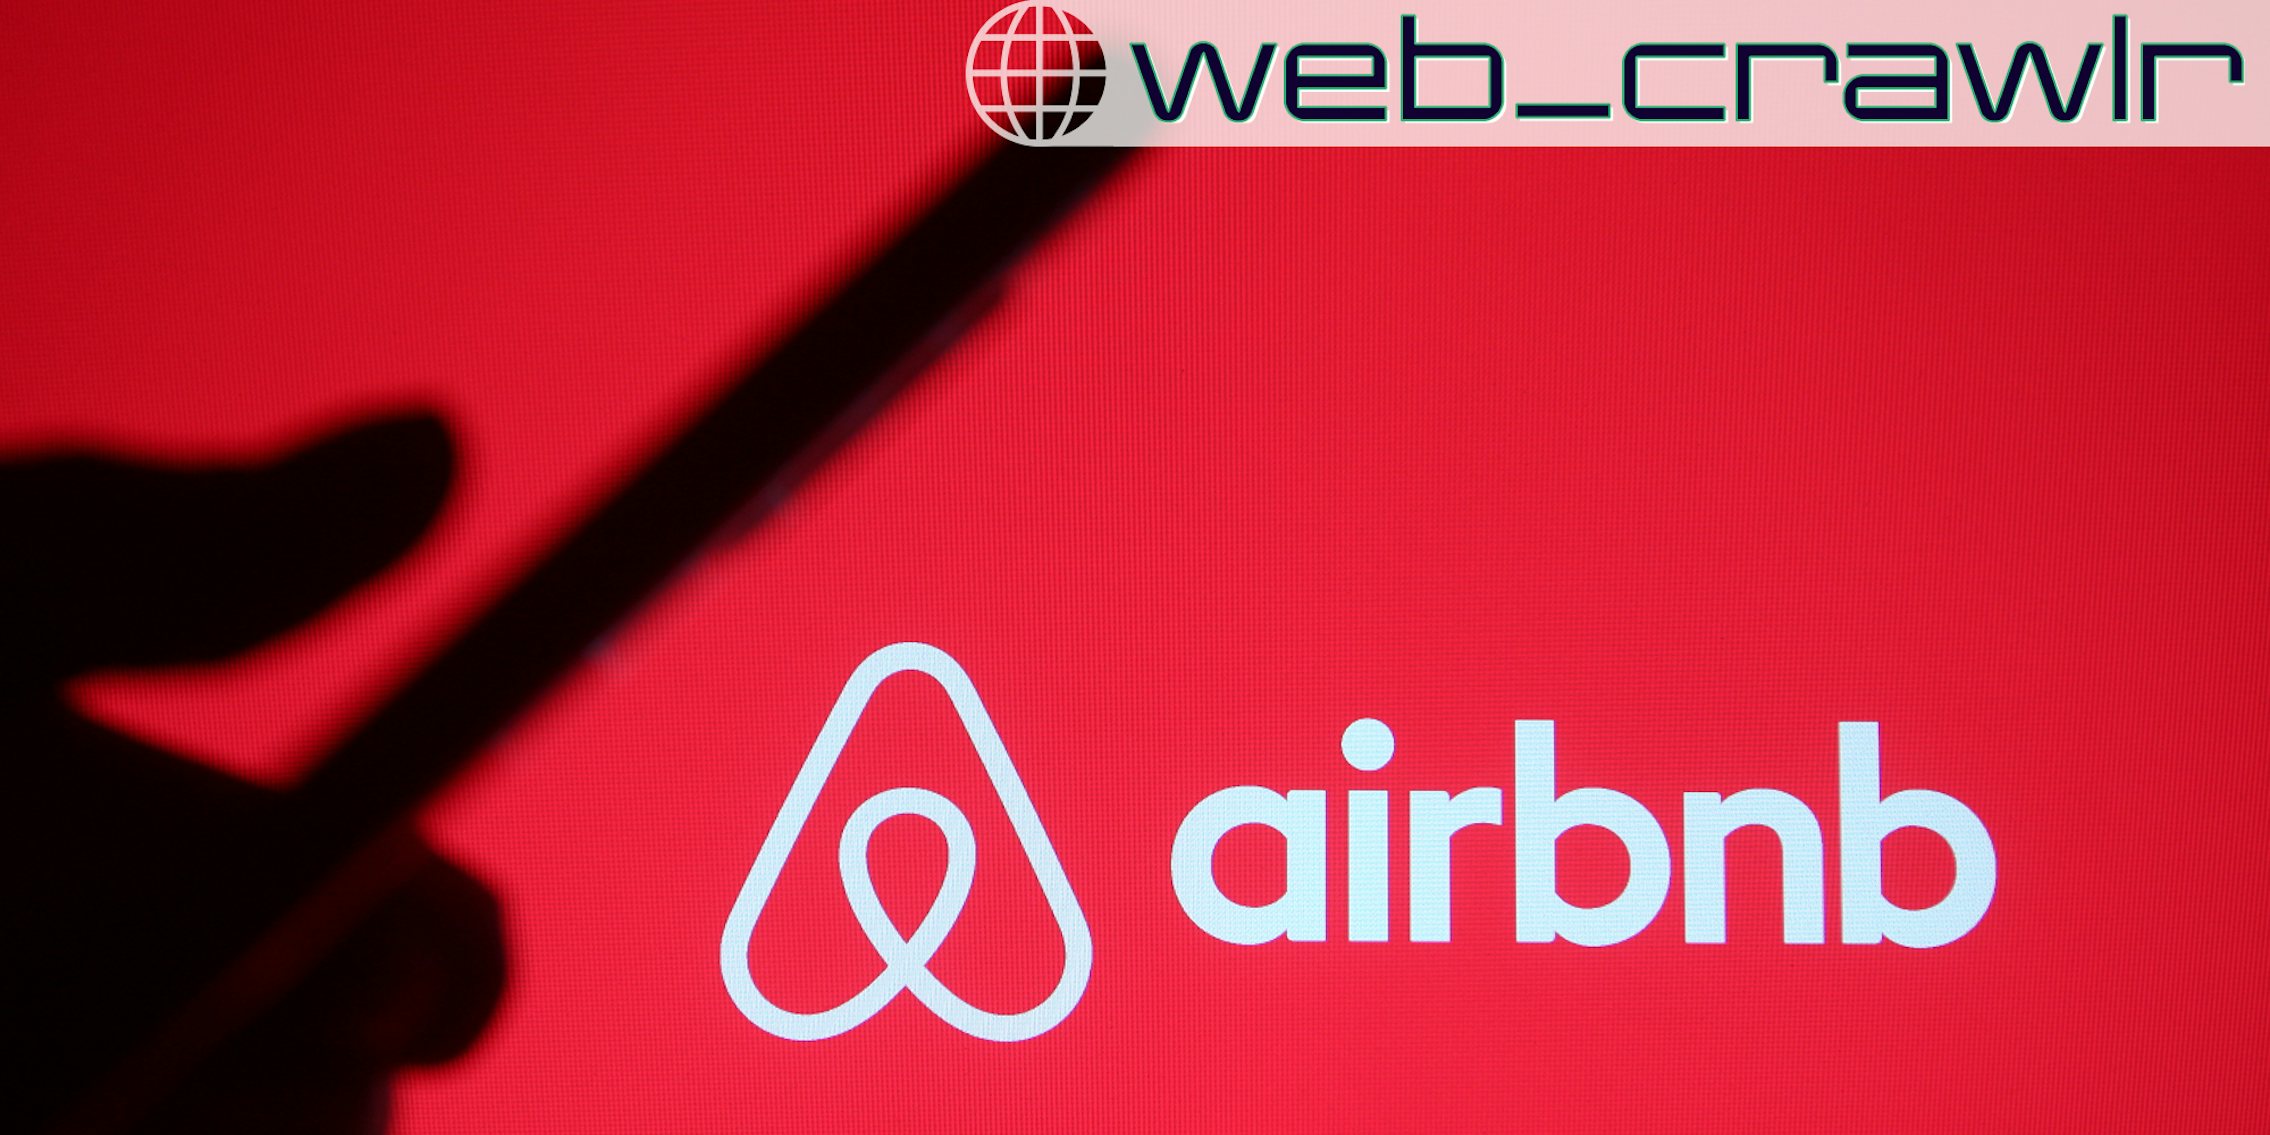 In this photo illustration Airbnb, Inc. logo is seen in front of a silhouette of a hand holding a mobile phone. The Daily Dot newsletter web_crawlr logo is in the top right corner.